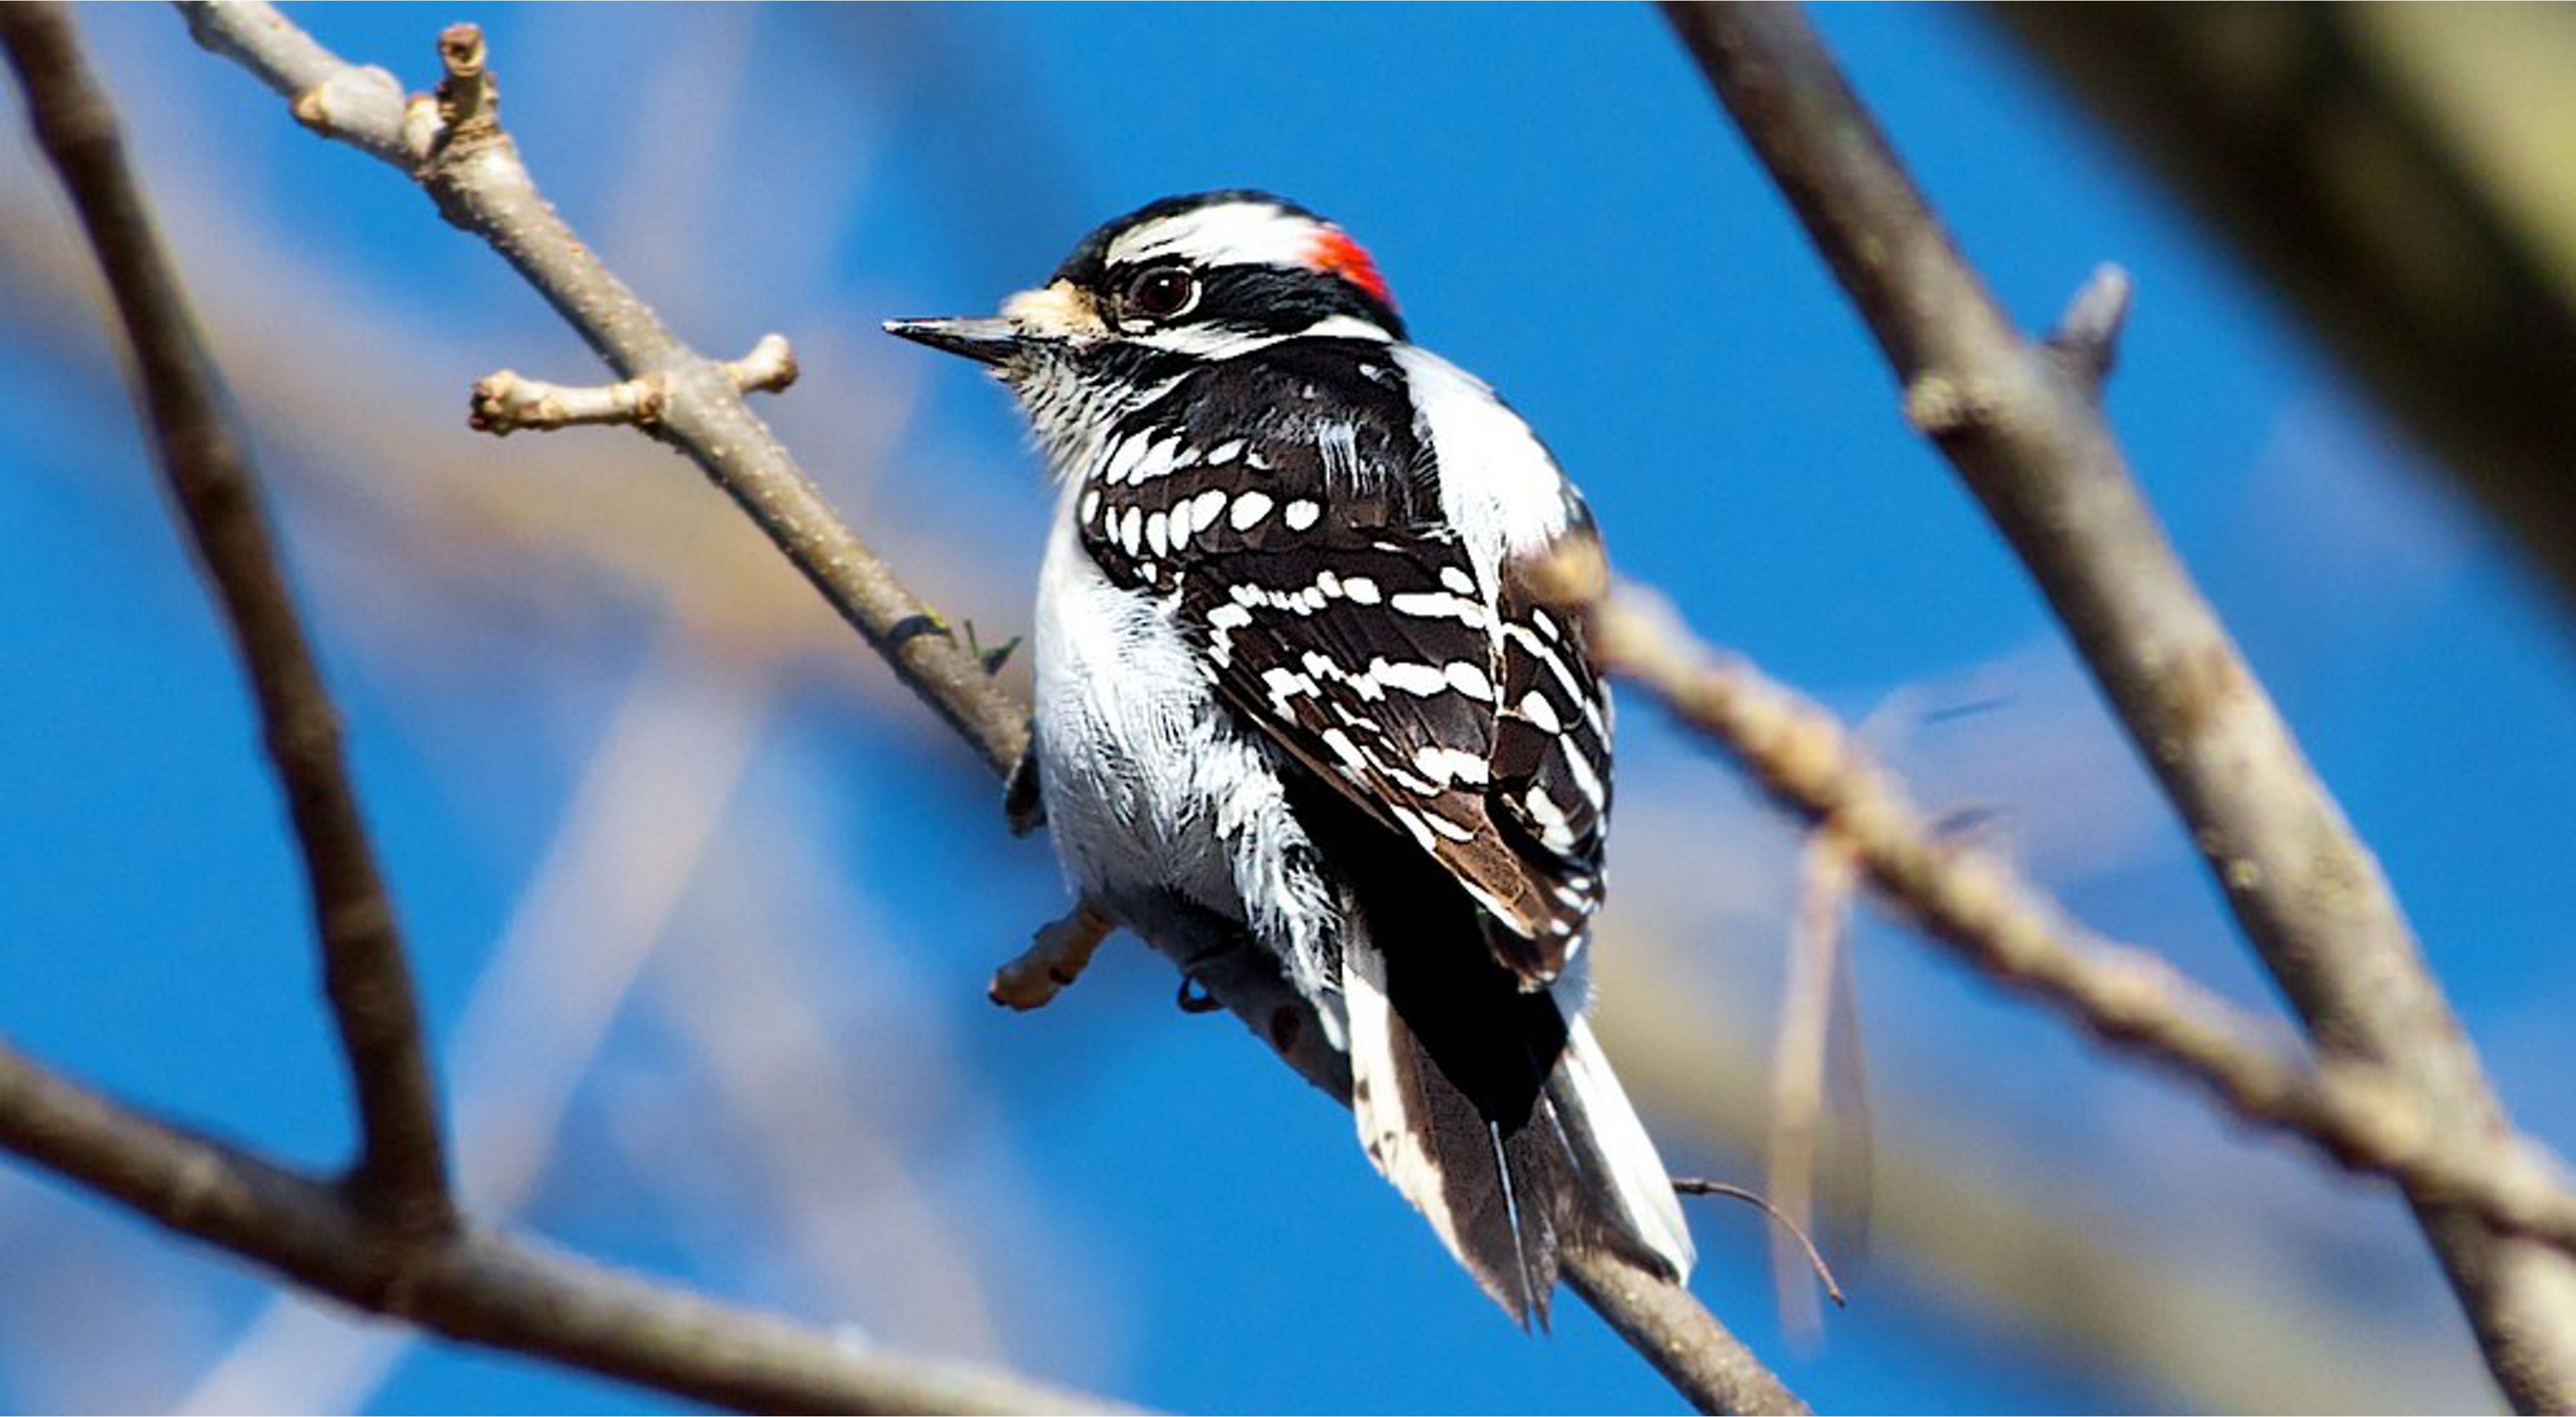 The downy woodpecker is one of the species found in the Ouachita River Nature Preserve.